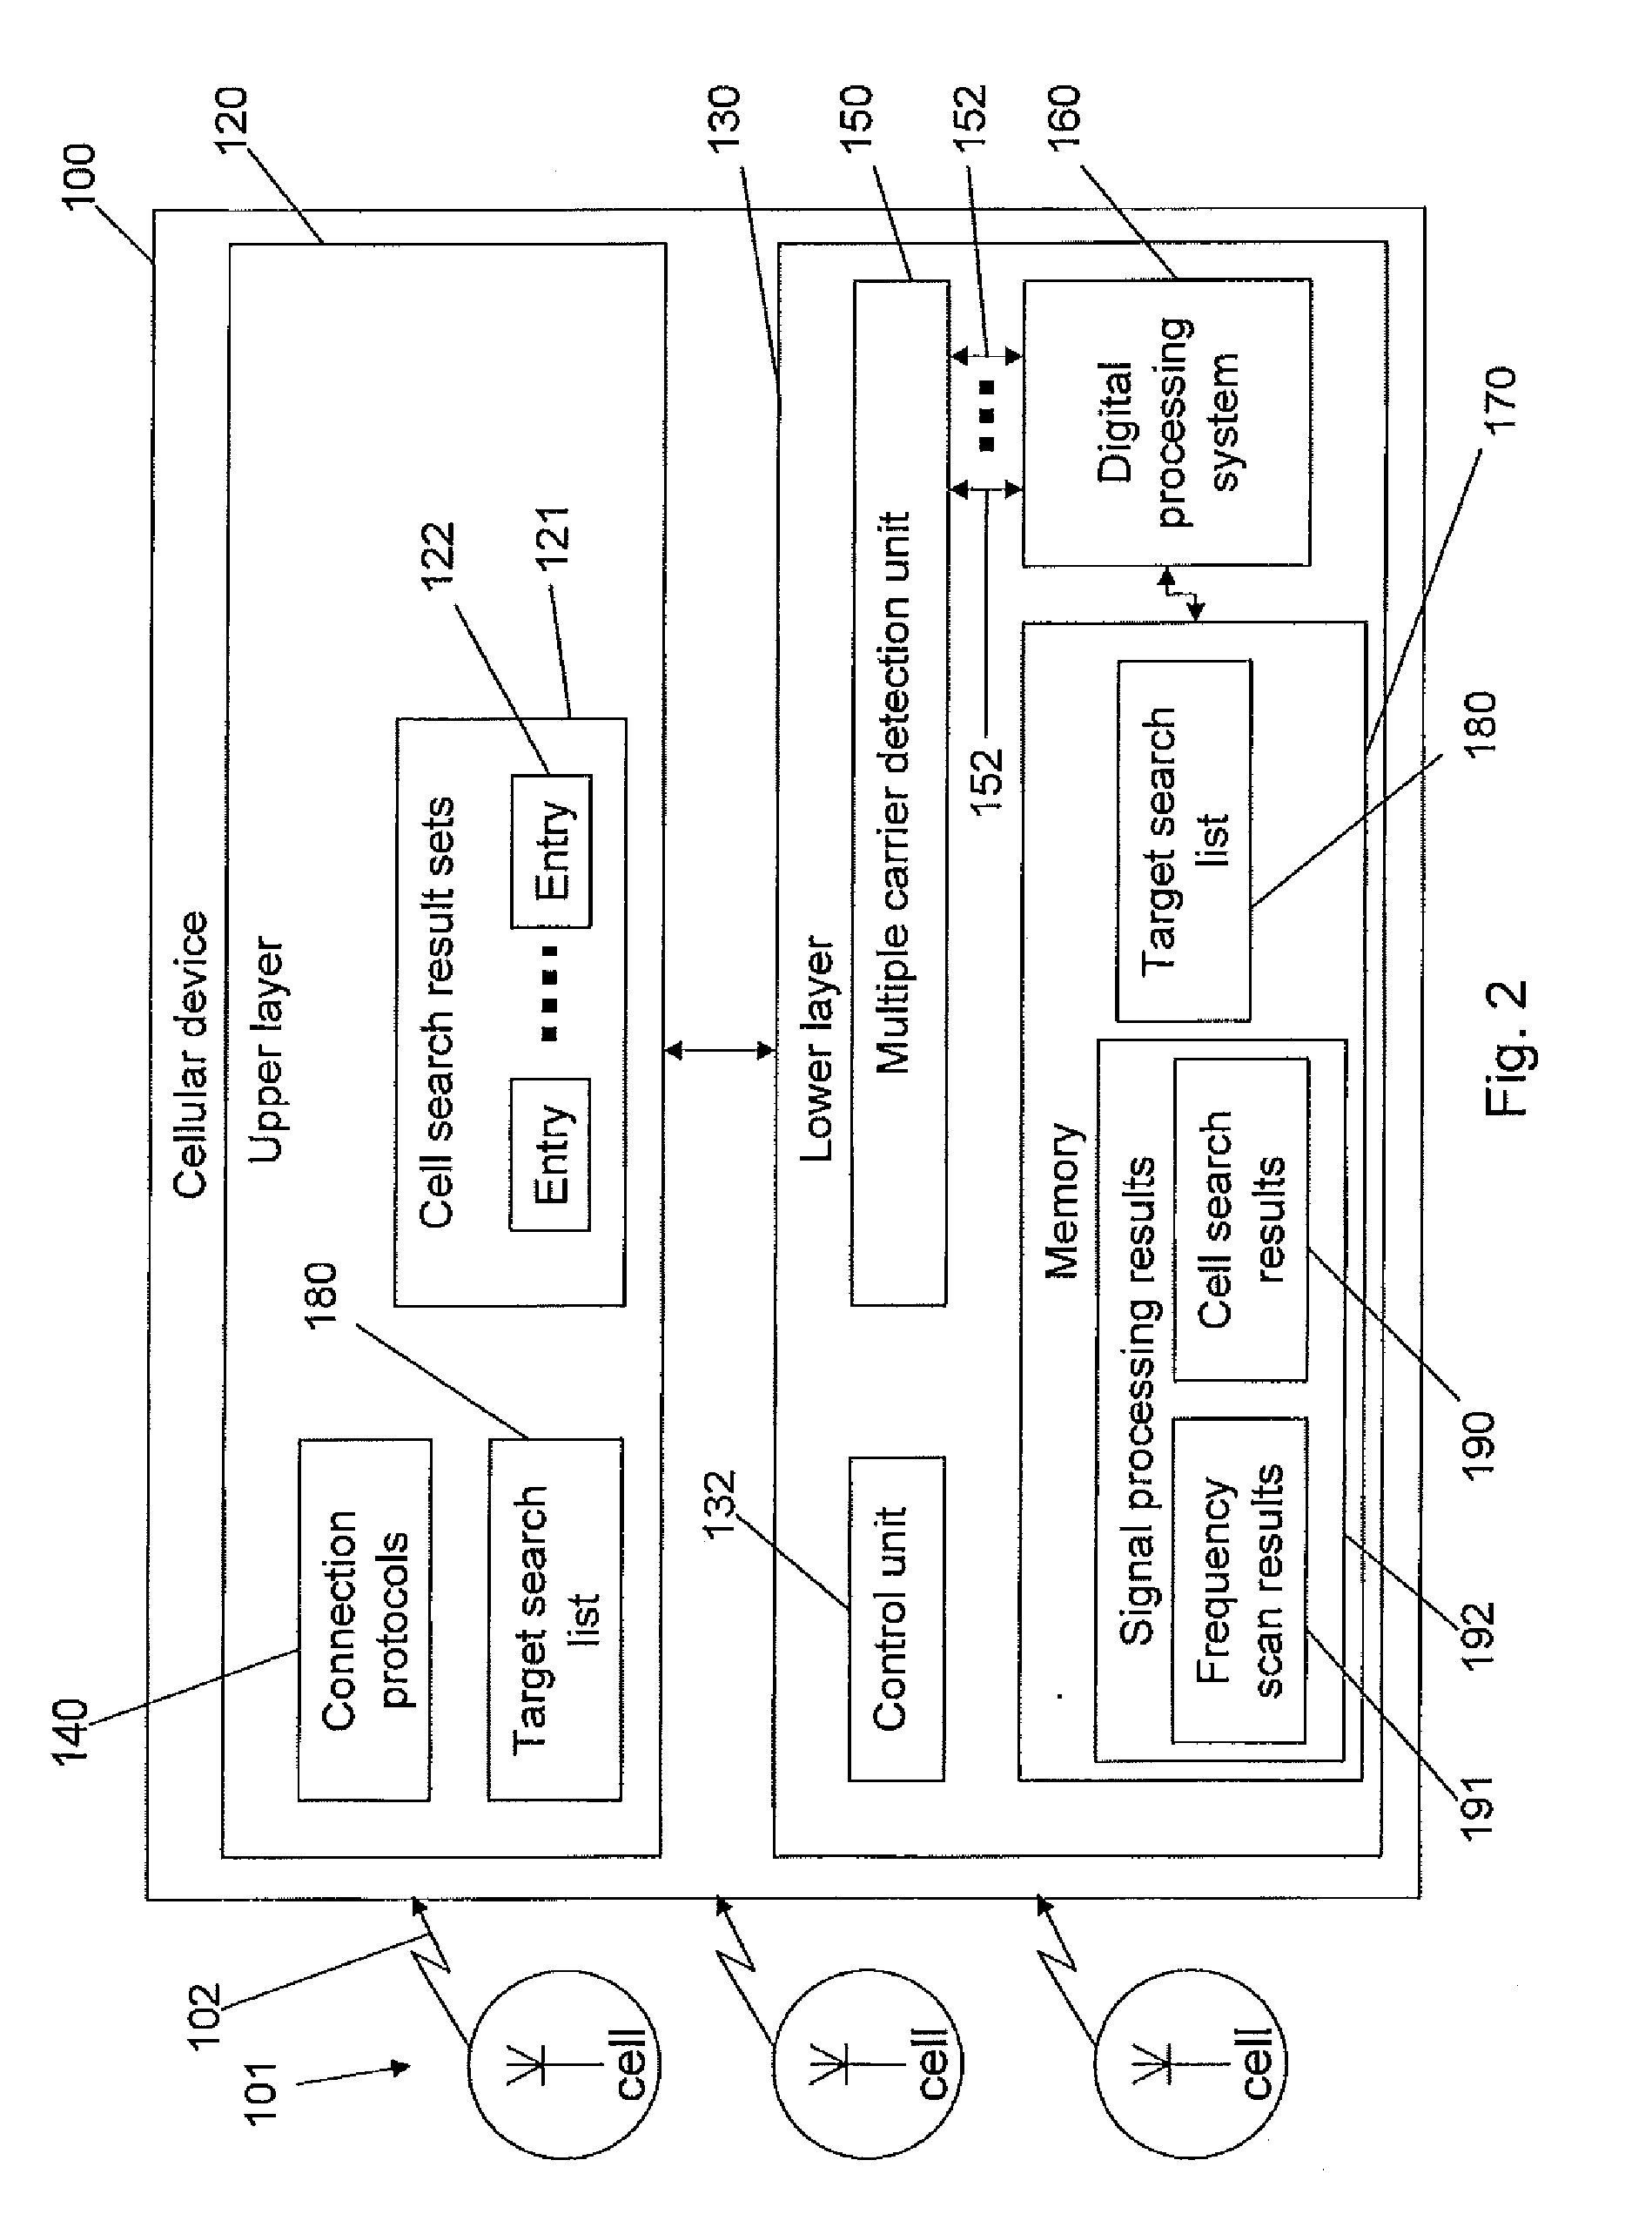 System and Method for Time Saving Cell Search for Mobile Devices in Single and Multiple Radio Technology Communication Systems